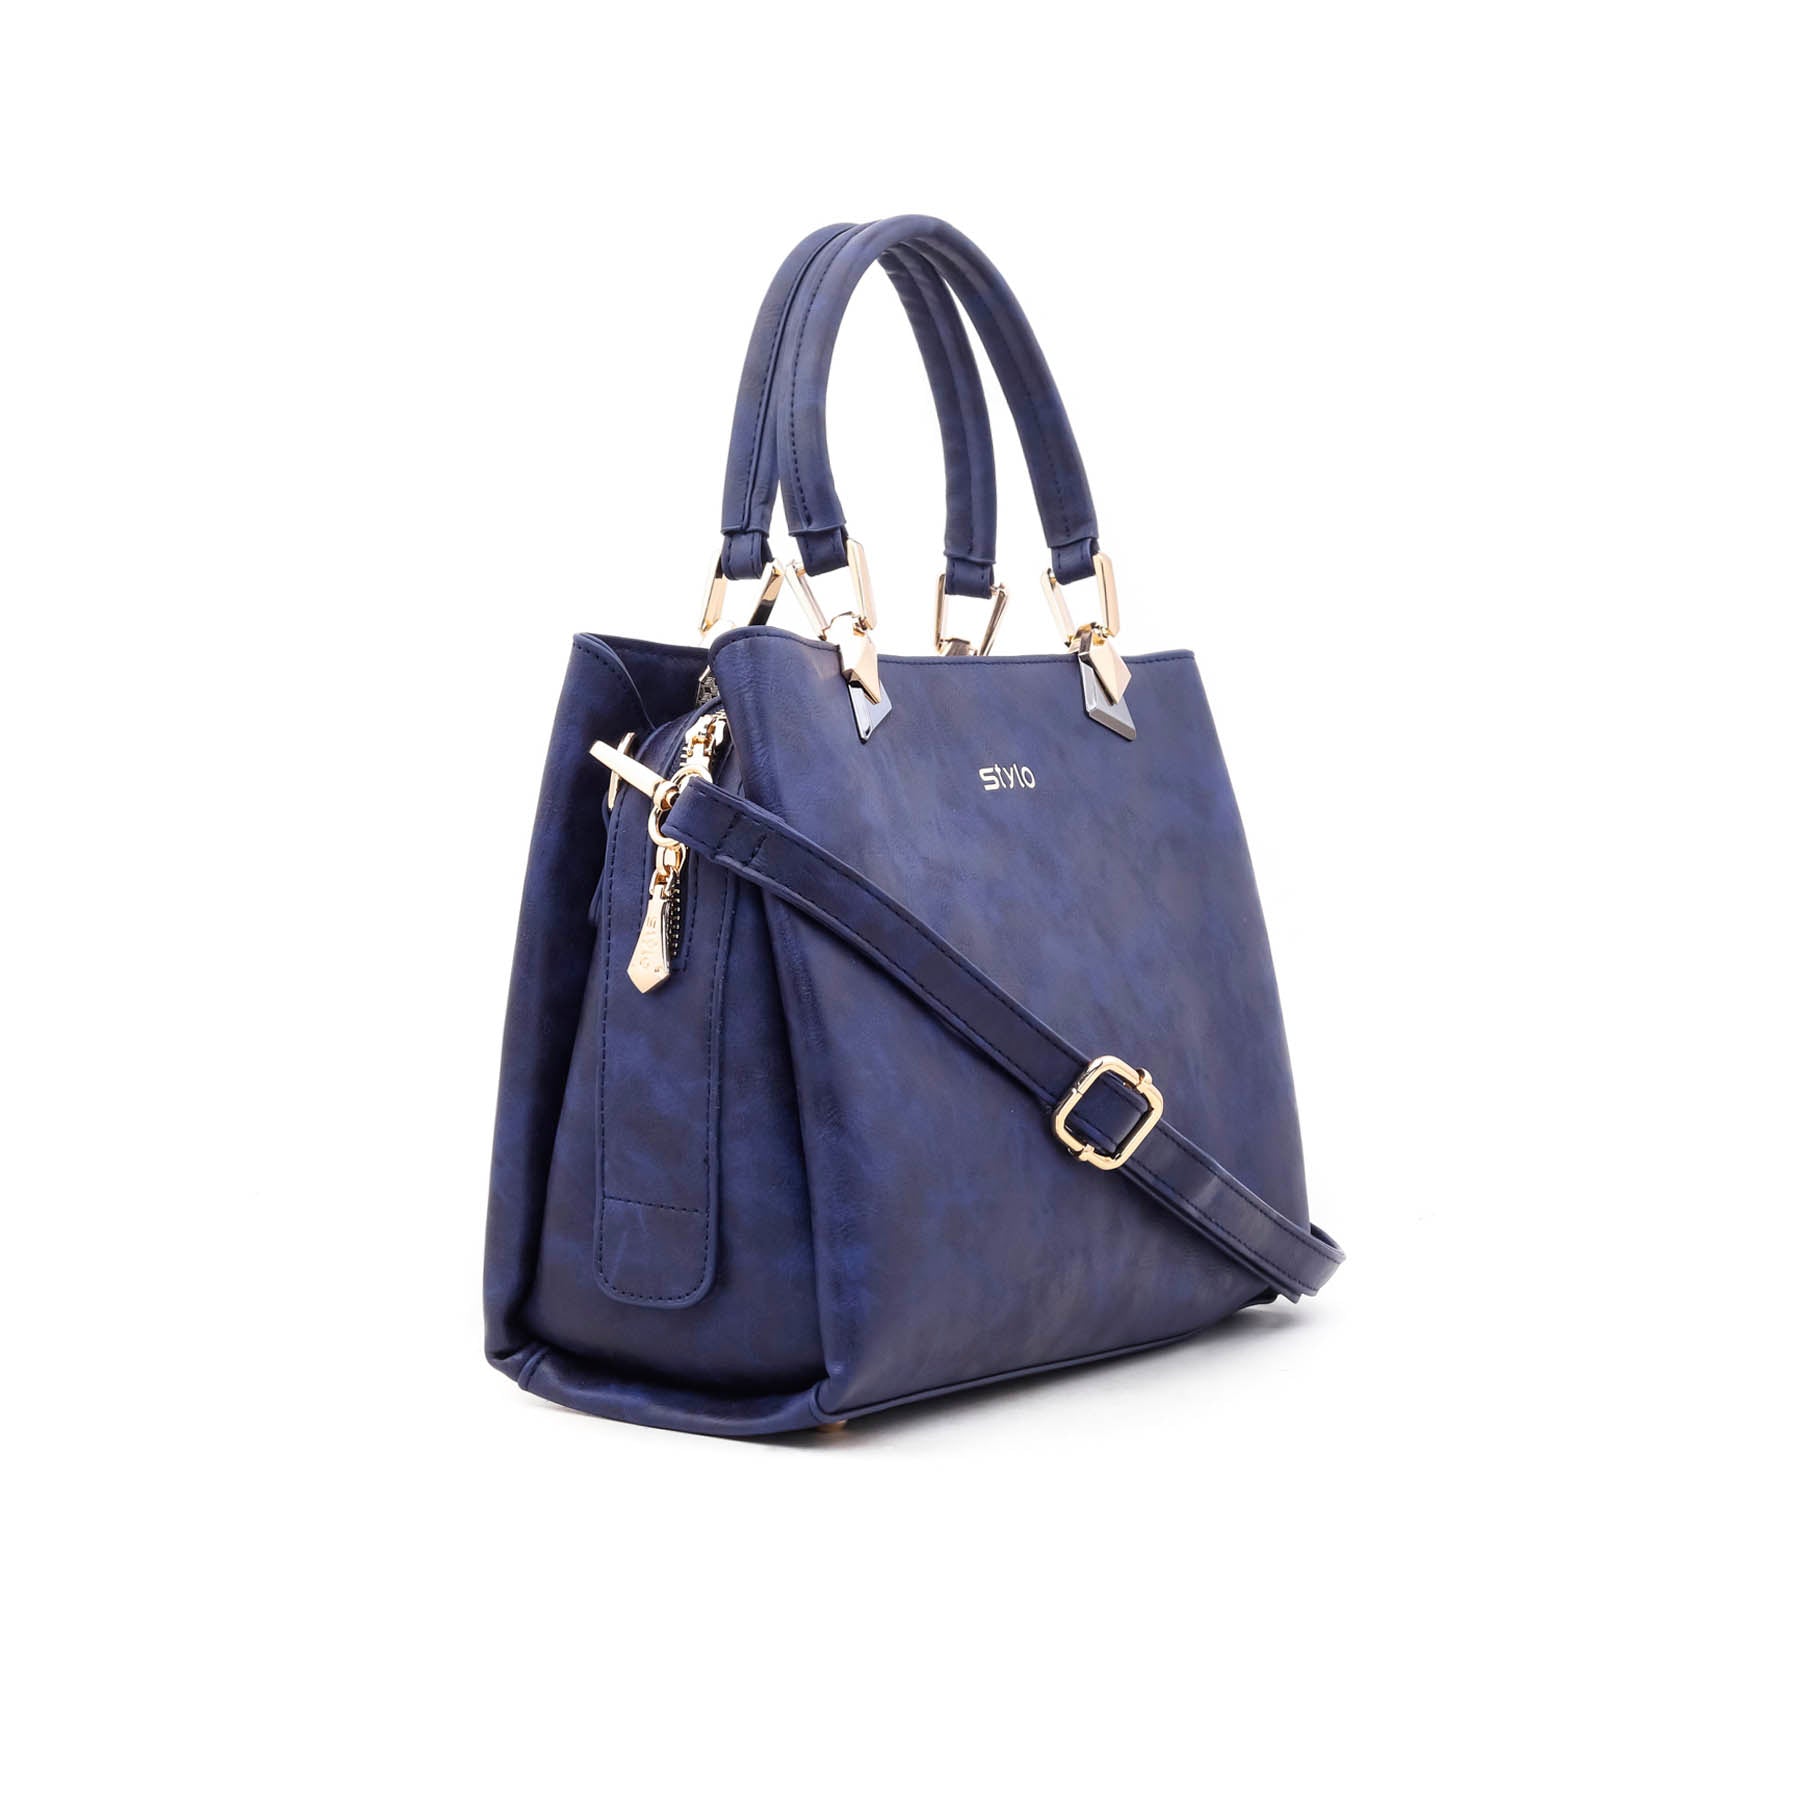 Addo Tote Bags: Elevate Your Style with Premium Quality Sophistication